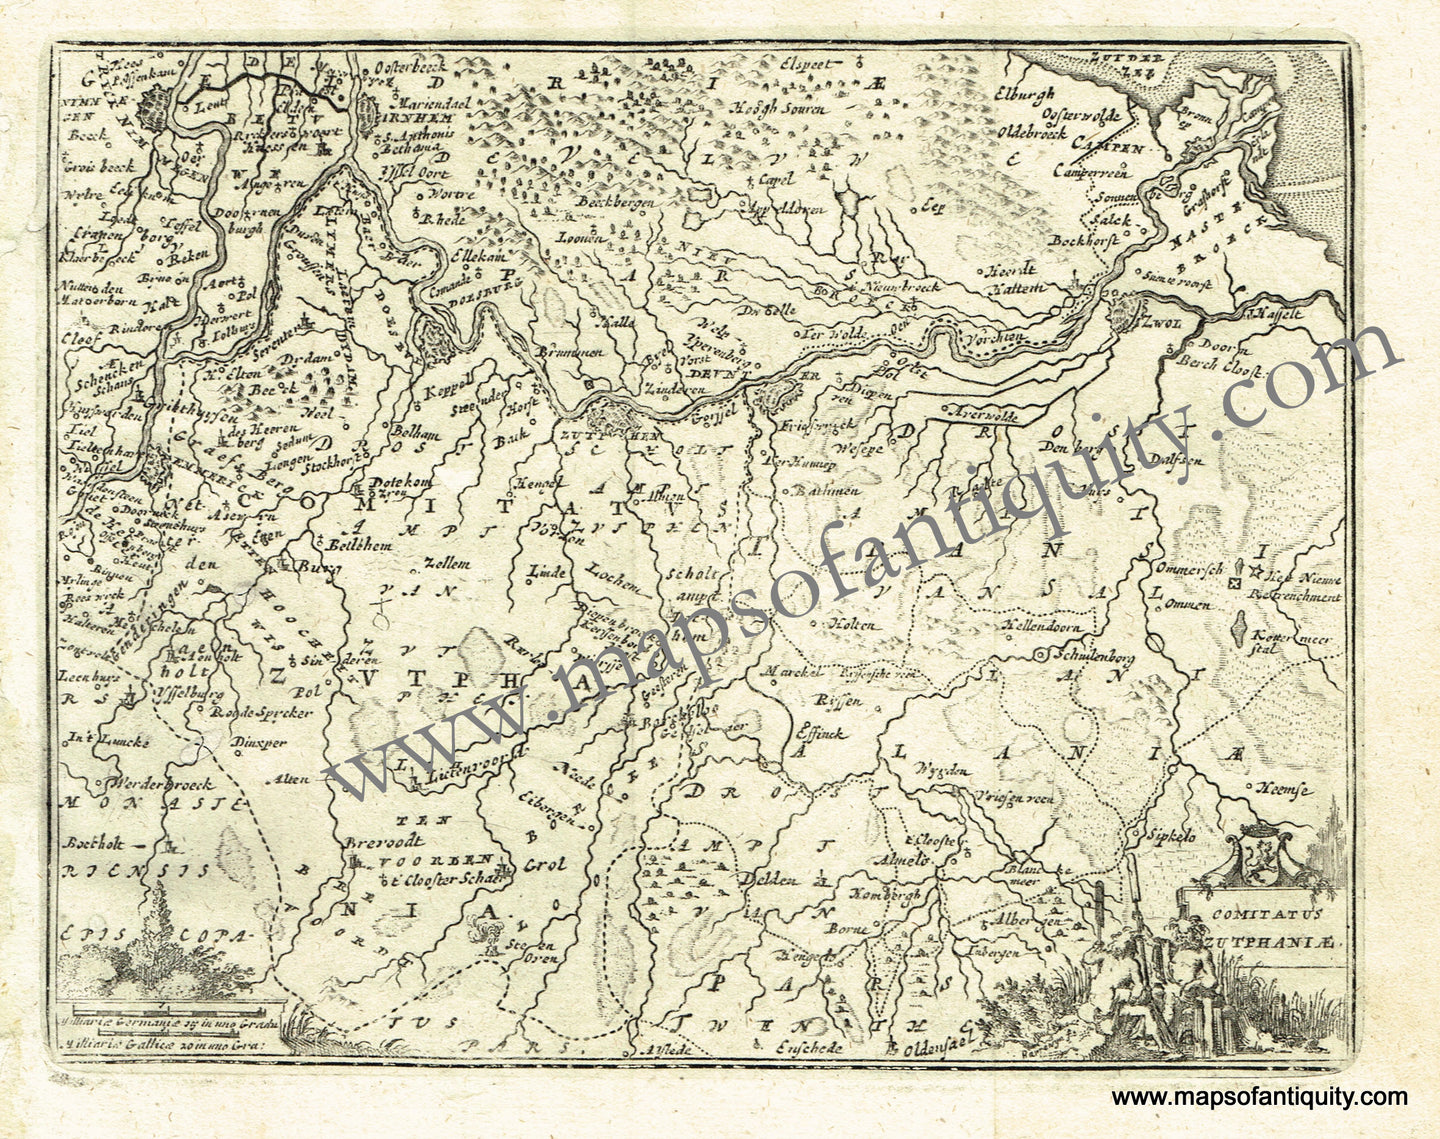 Antique-Black-and-White-Map-Comitatus-Zutphaniae-(Part-of-the-Netherlands)-Europe-Netherlands-1725-De-Aefferden-Maps-Of-Antiquity